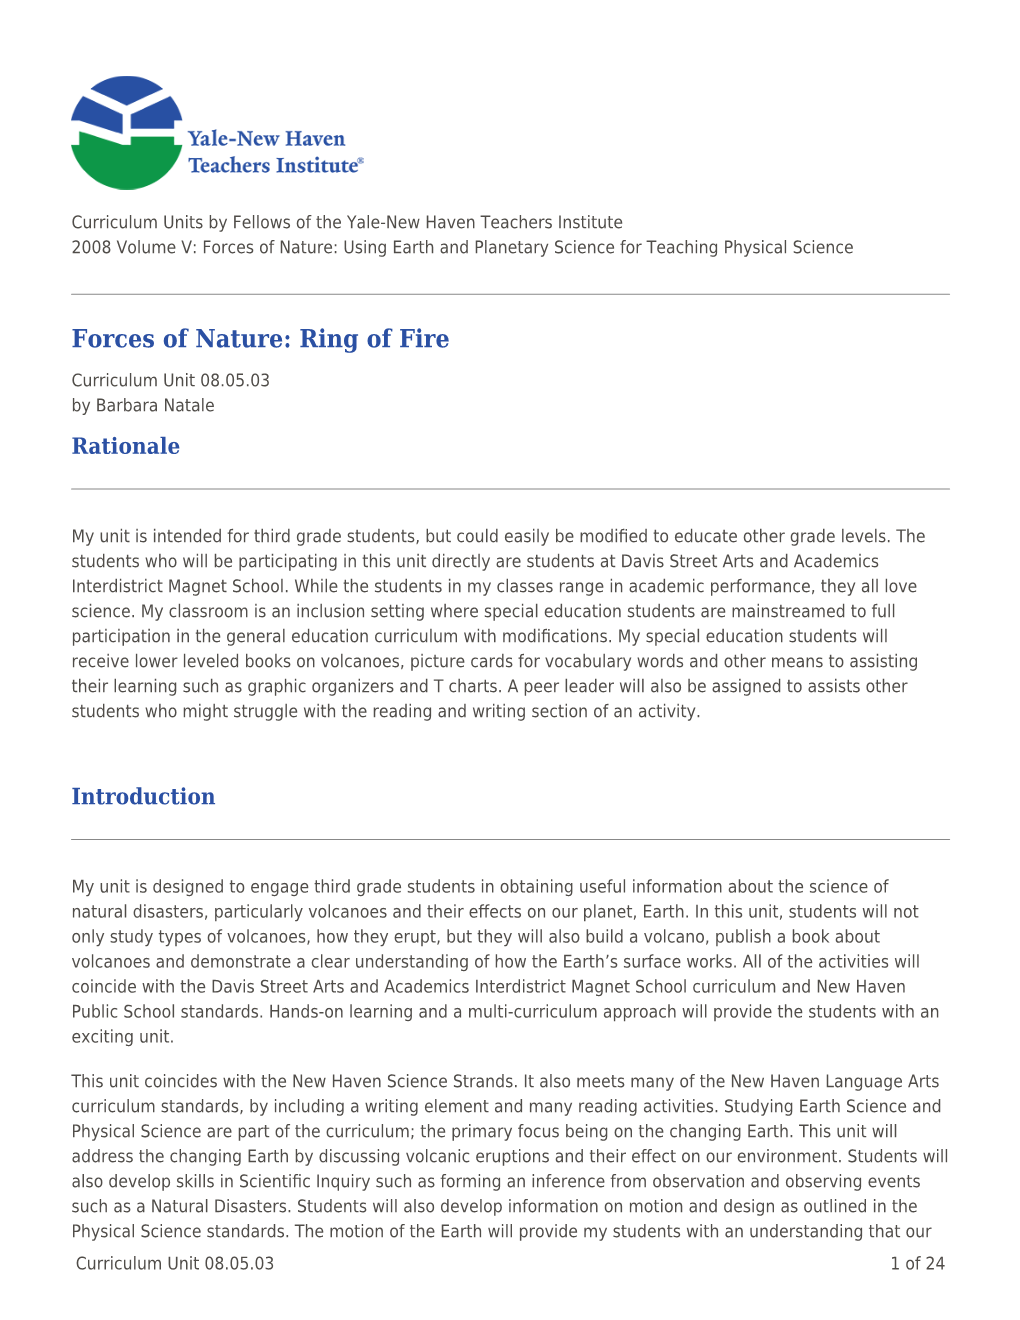 Forces of Nature: Ring of Fire